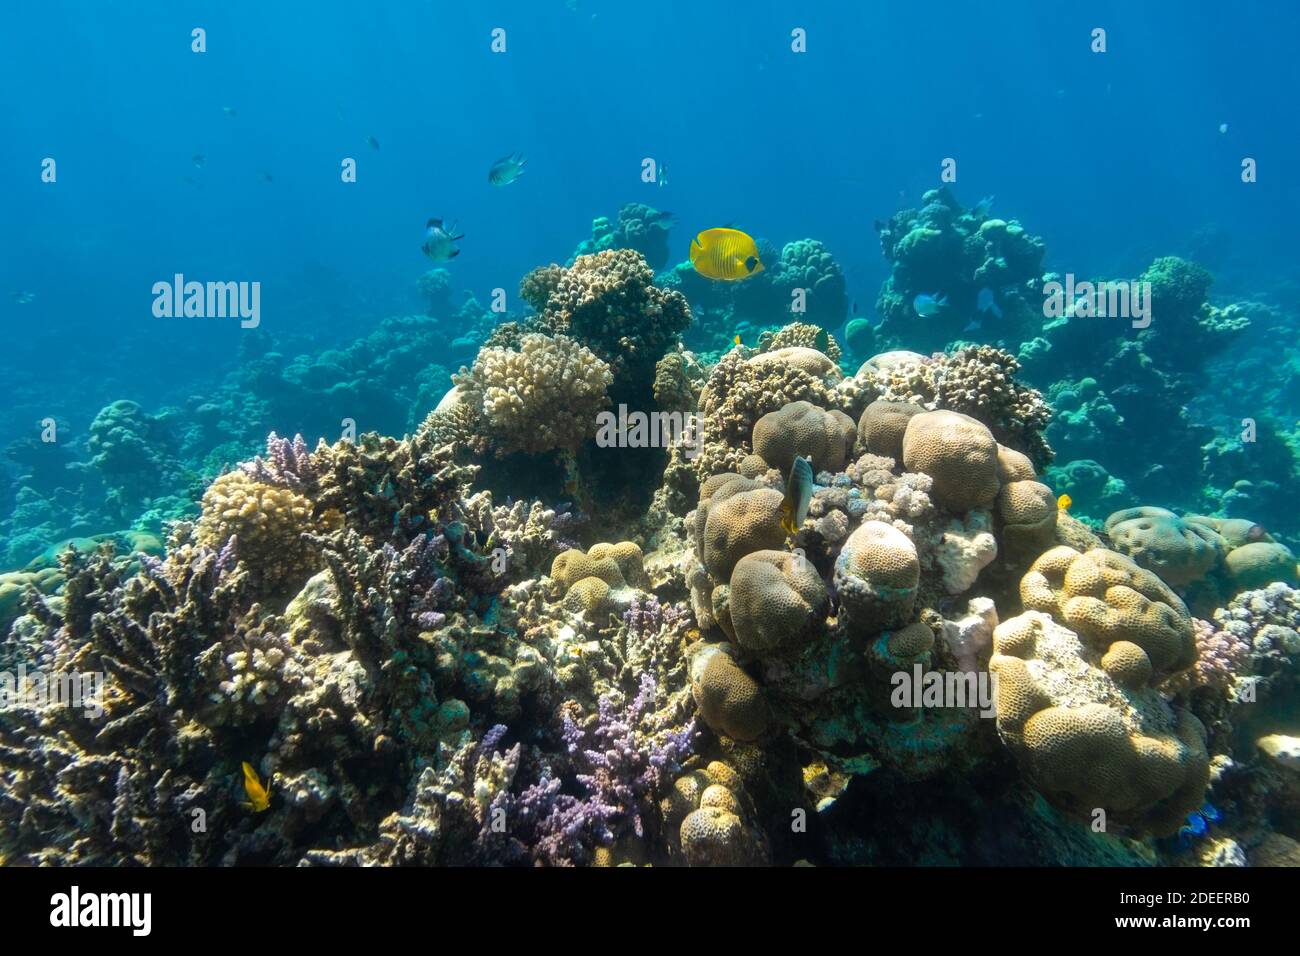 Butterflyfish (Masked, Chaetodon) in the coral reef, Red Sea, Egypt. Bright yellow striped tropical fish in the ocean, clear blue turquoise water. Und Stock Photo